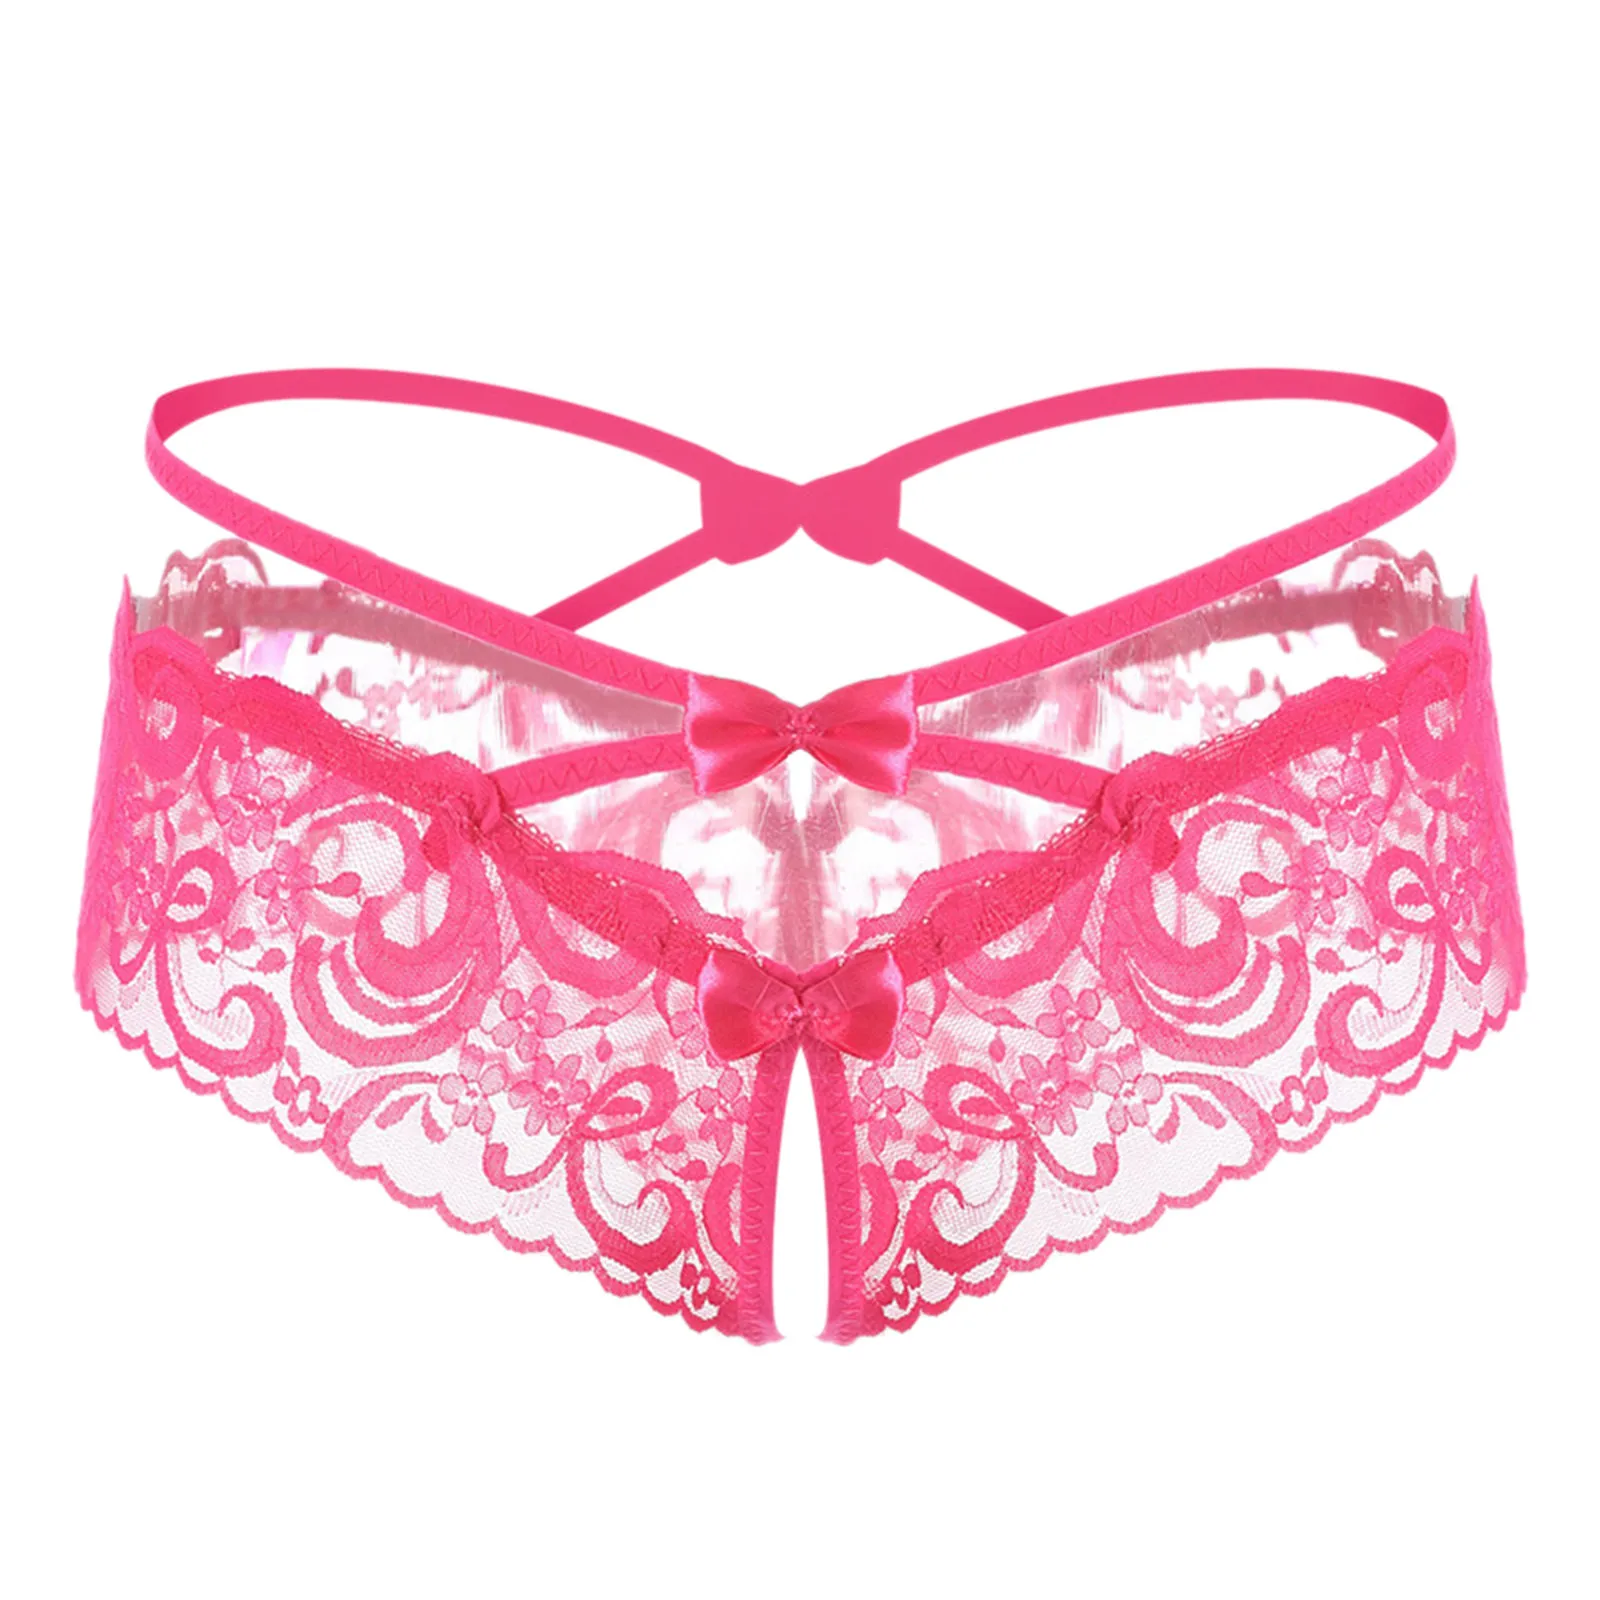 

Underwear Underpants Pants Appeal Open Lace Women T Lingerie Sexy Cross Bow Crotch Intimates intimates sexy lingerie